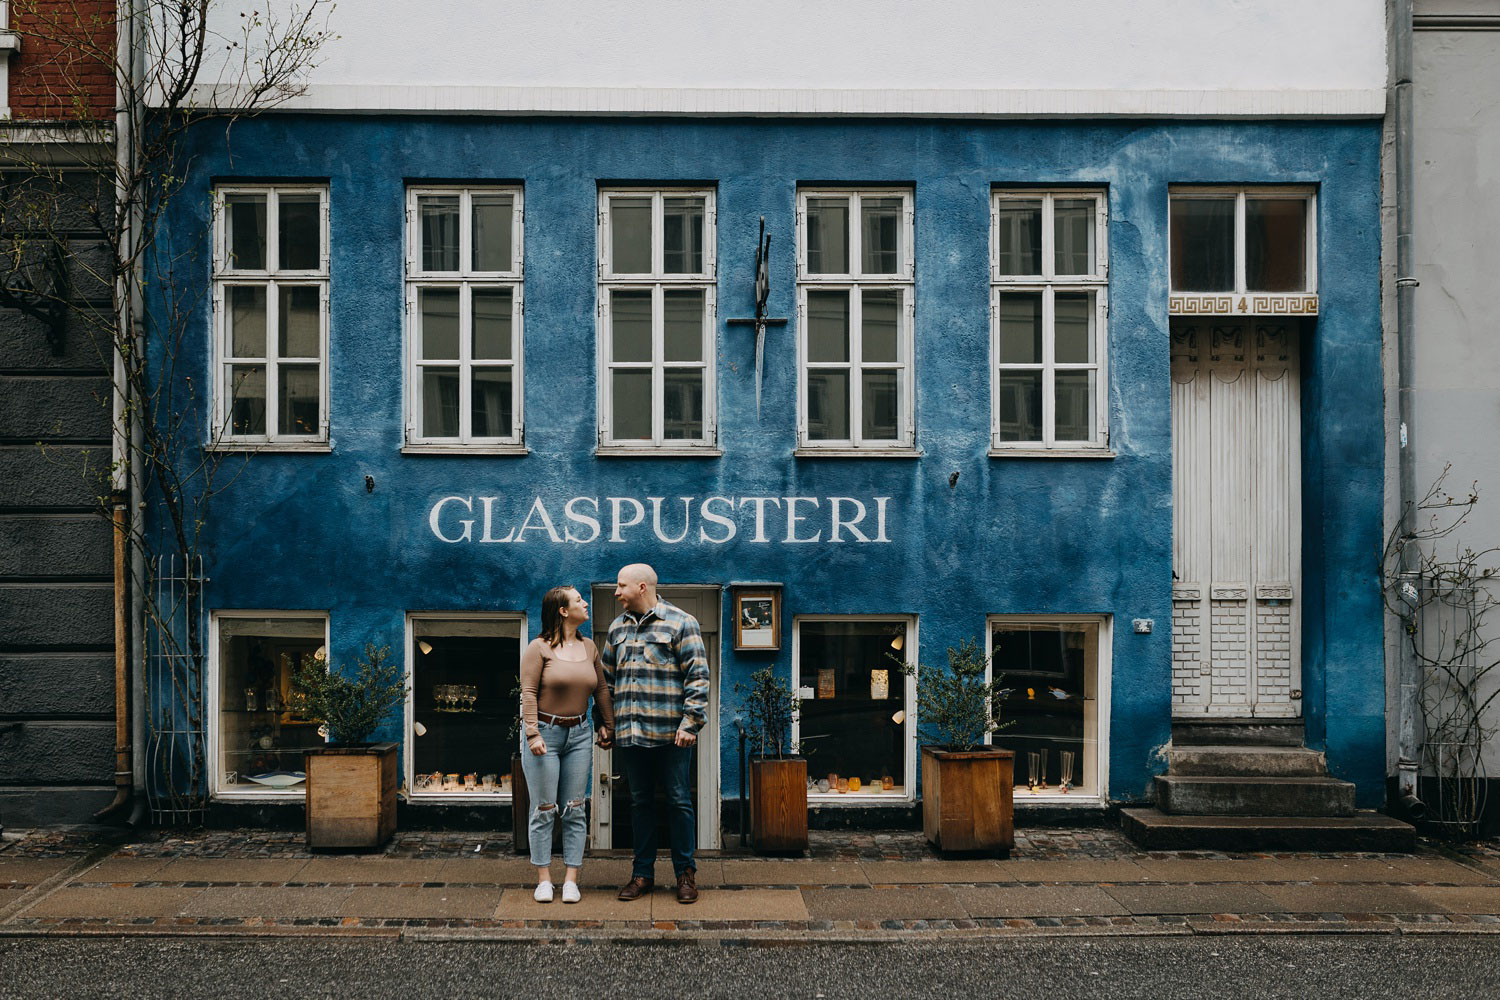 couple posing in front of colourful facades of Copenhagen's buildings